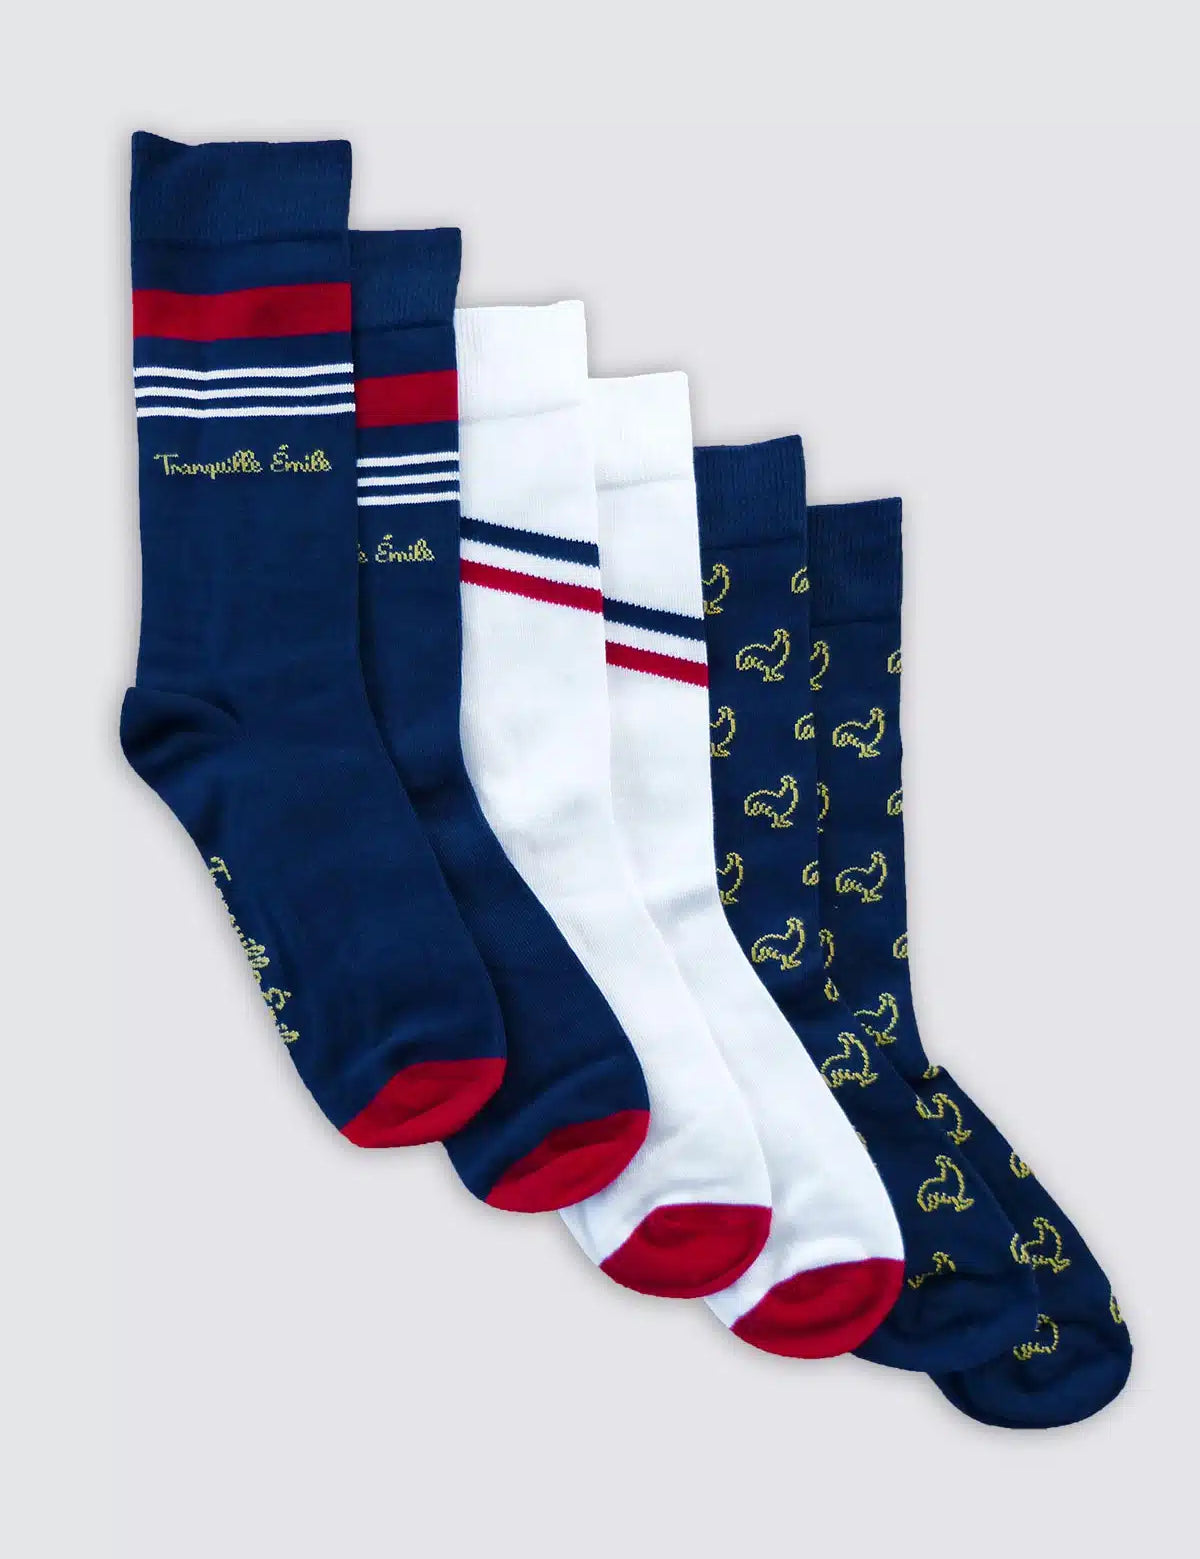 chaussettes-made-in-france-pack-sport-1_jpg.webp